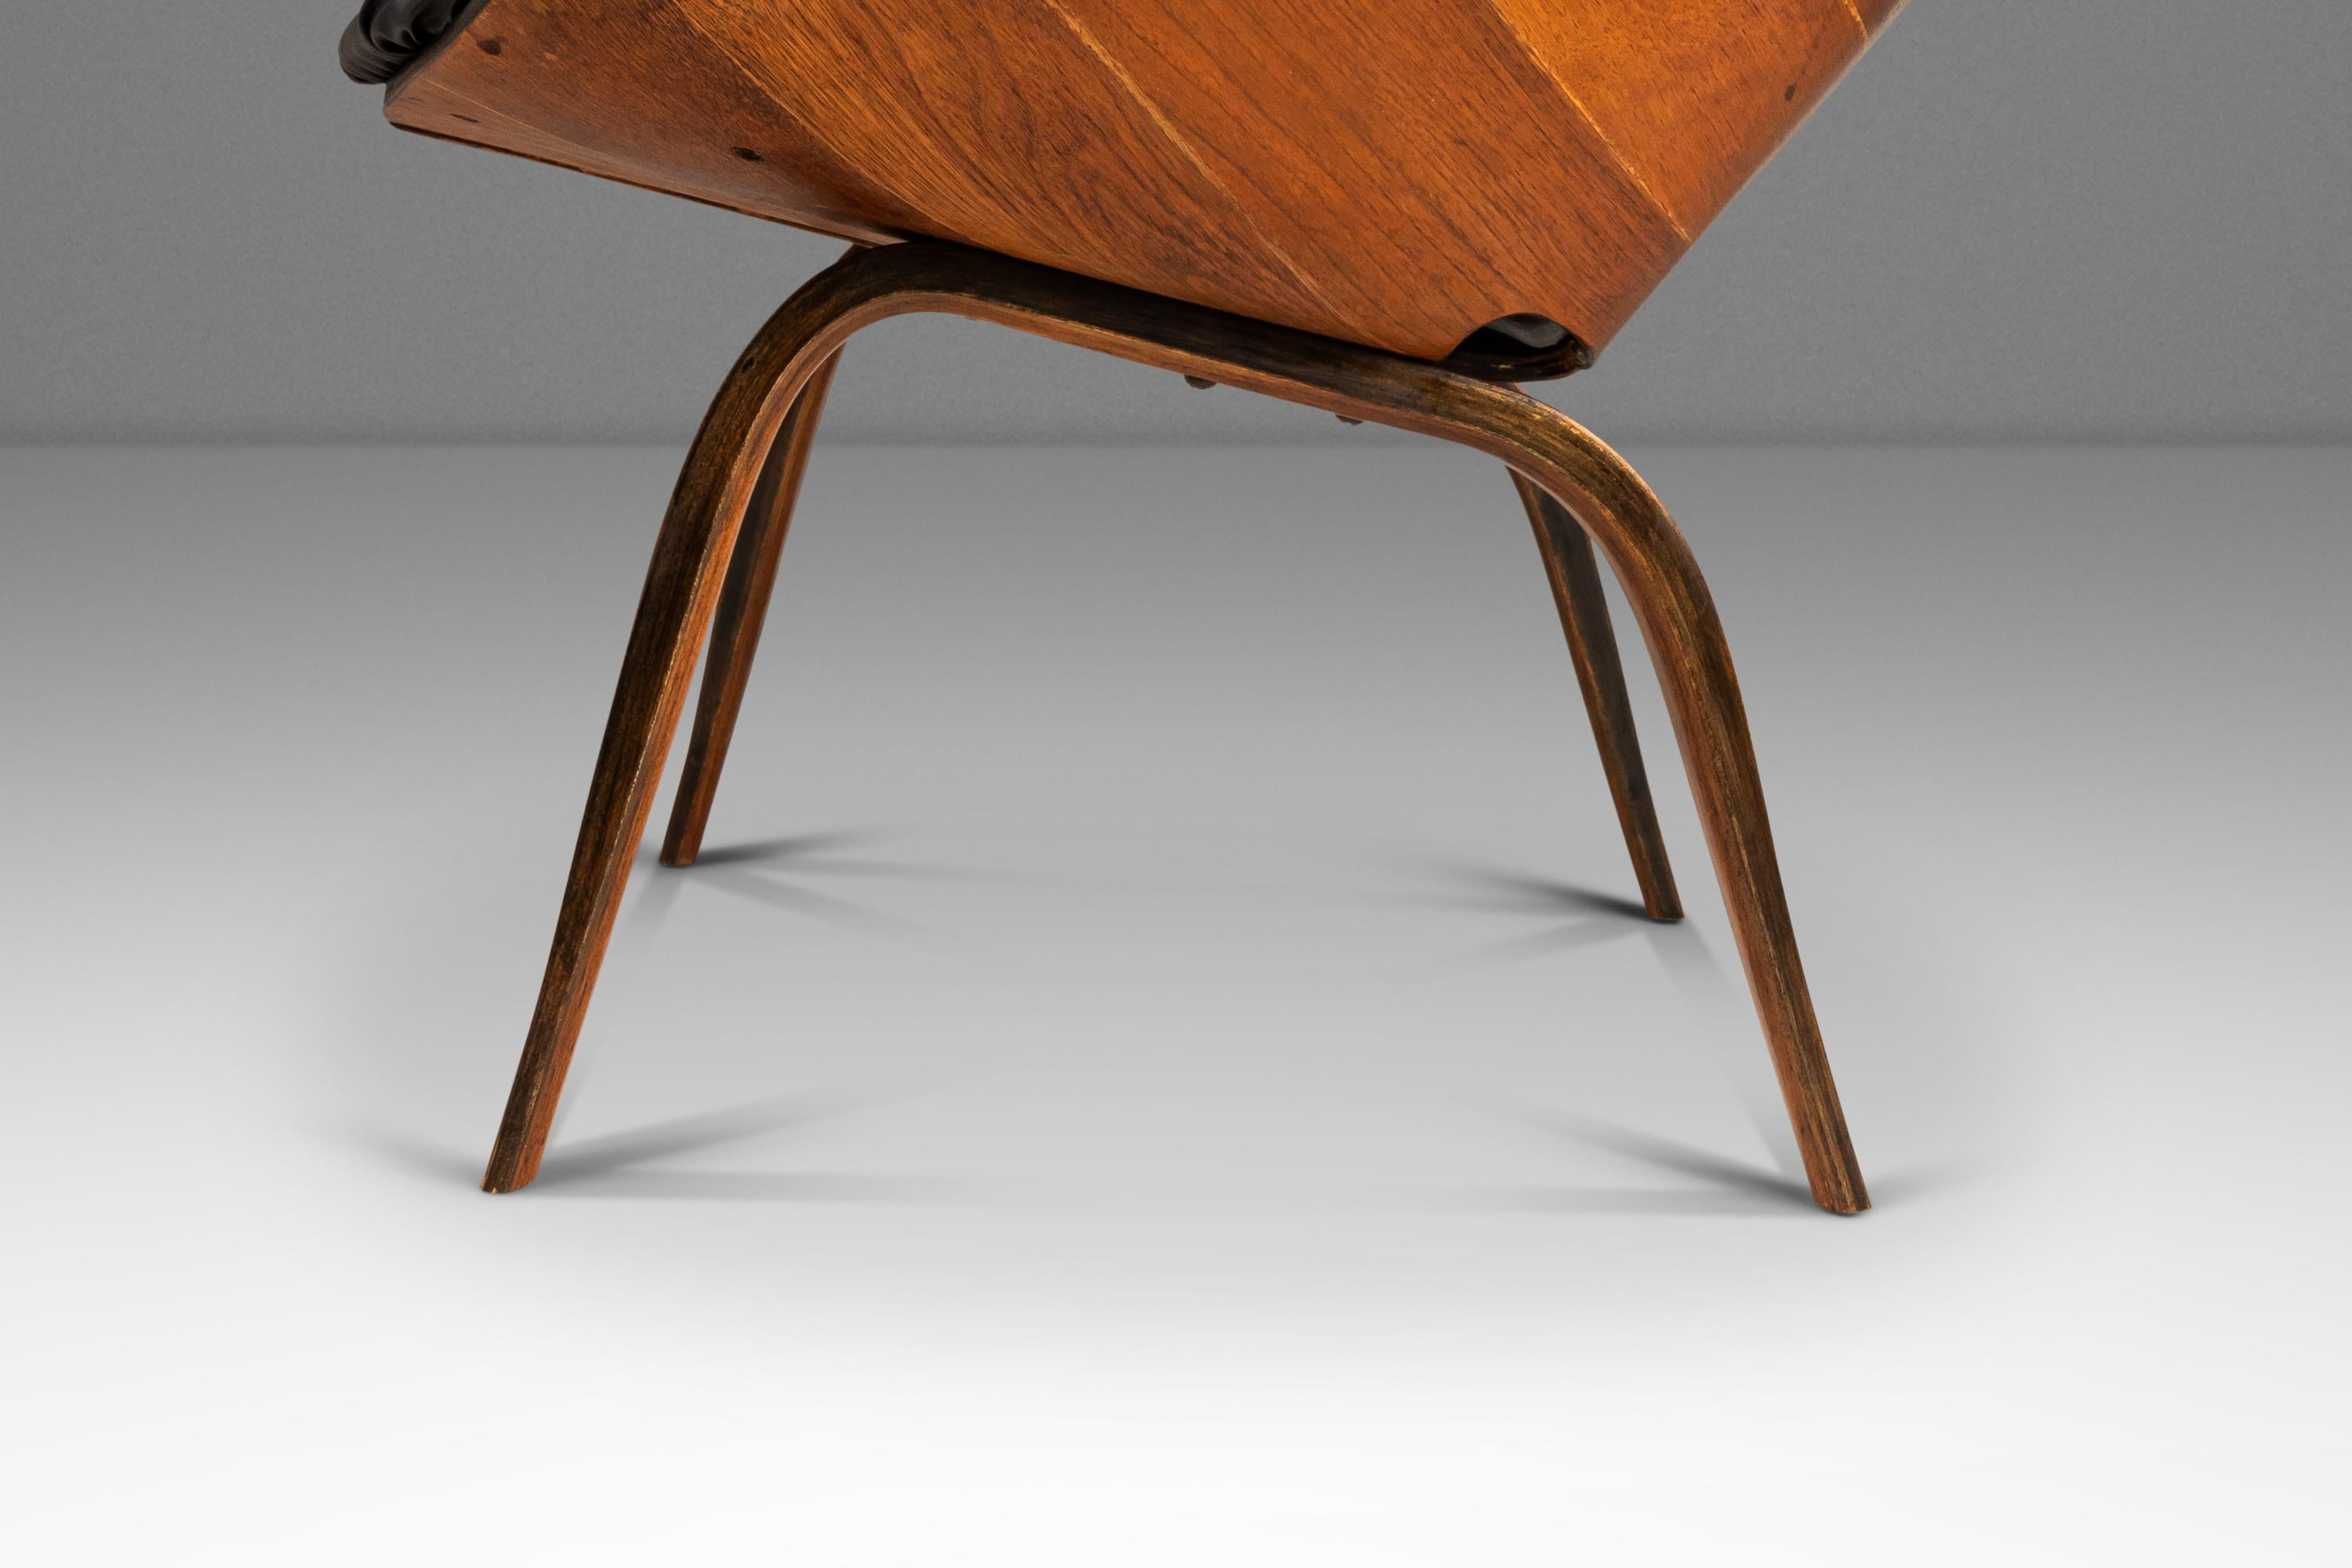 Mrs. Lounge Chair in Walnut & Vinyl by George Mulhauser for Plycraft, c. 1960s For Sale 9